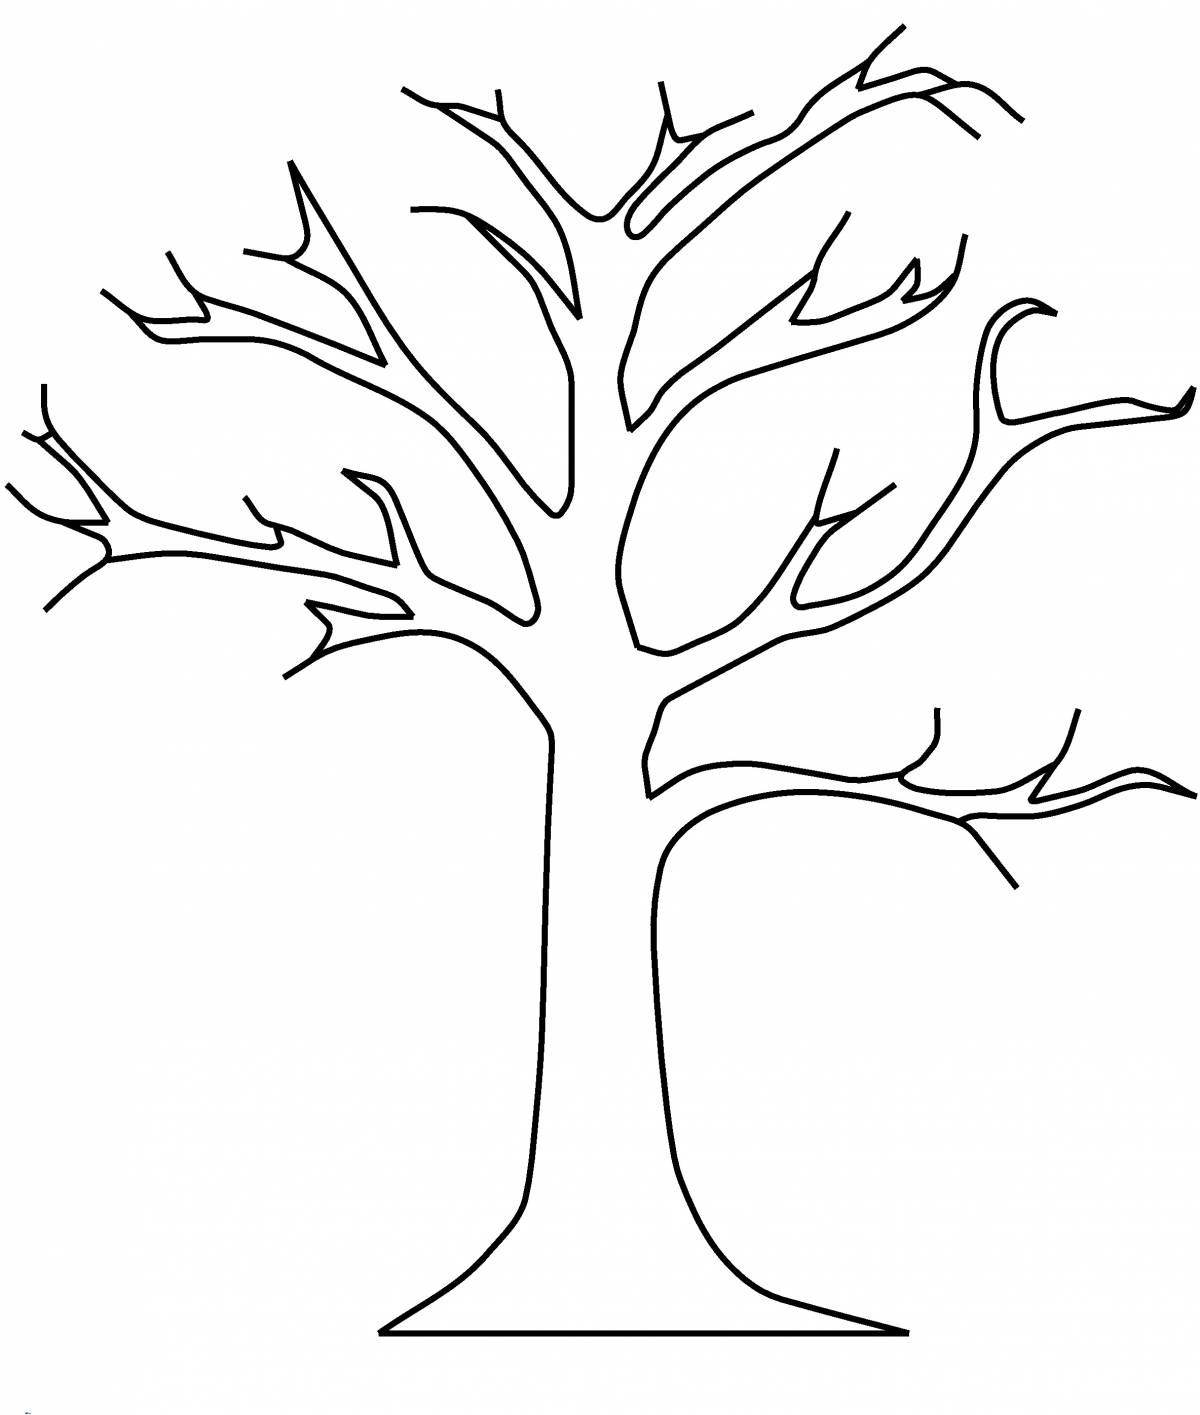 Live winter tree coloring page for 3-4 year olds